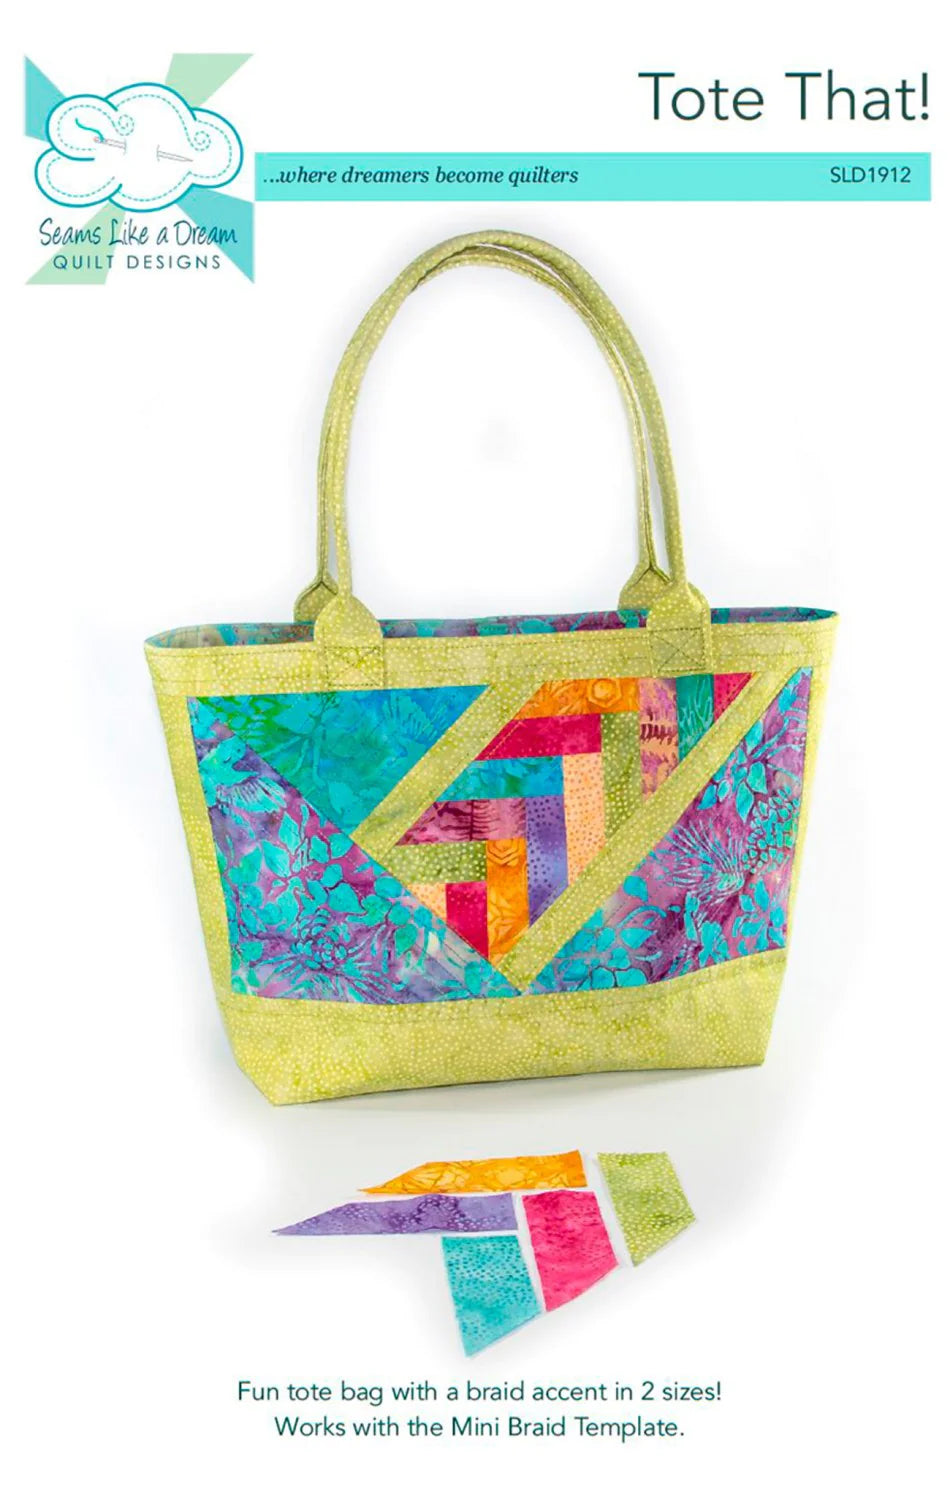 Tote That! by Seams Like a Dream Quilt Designs